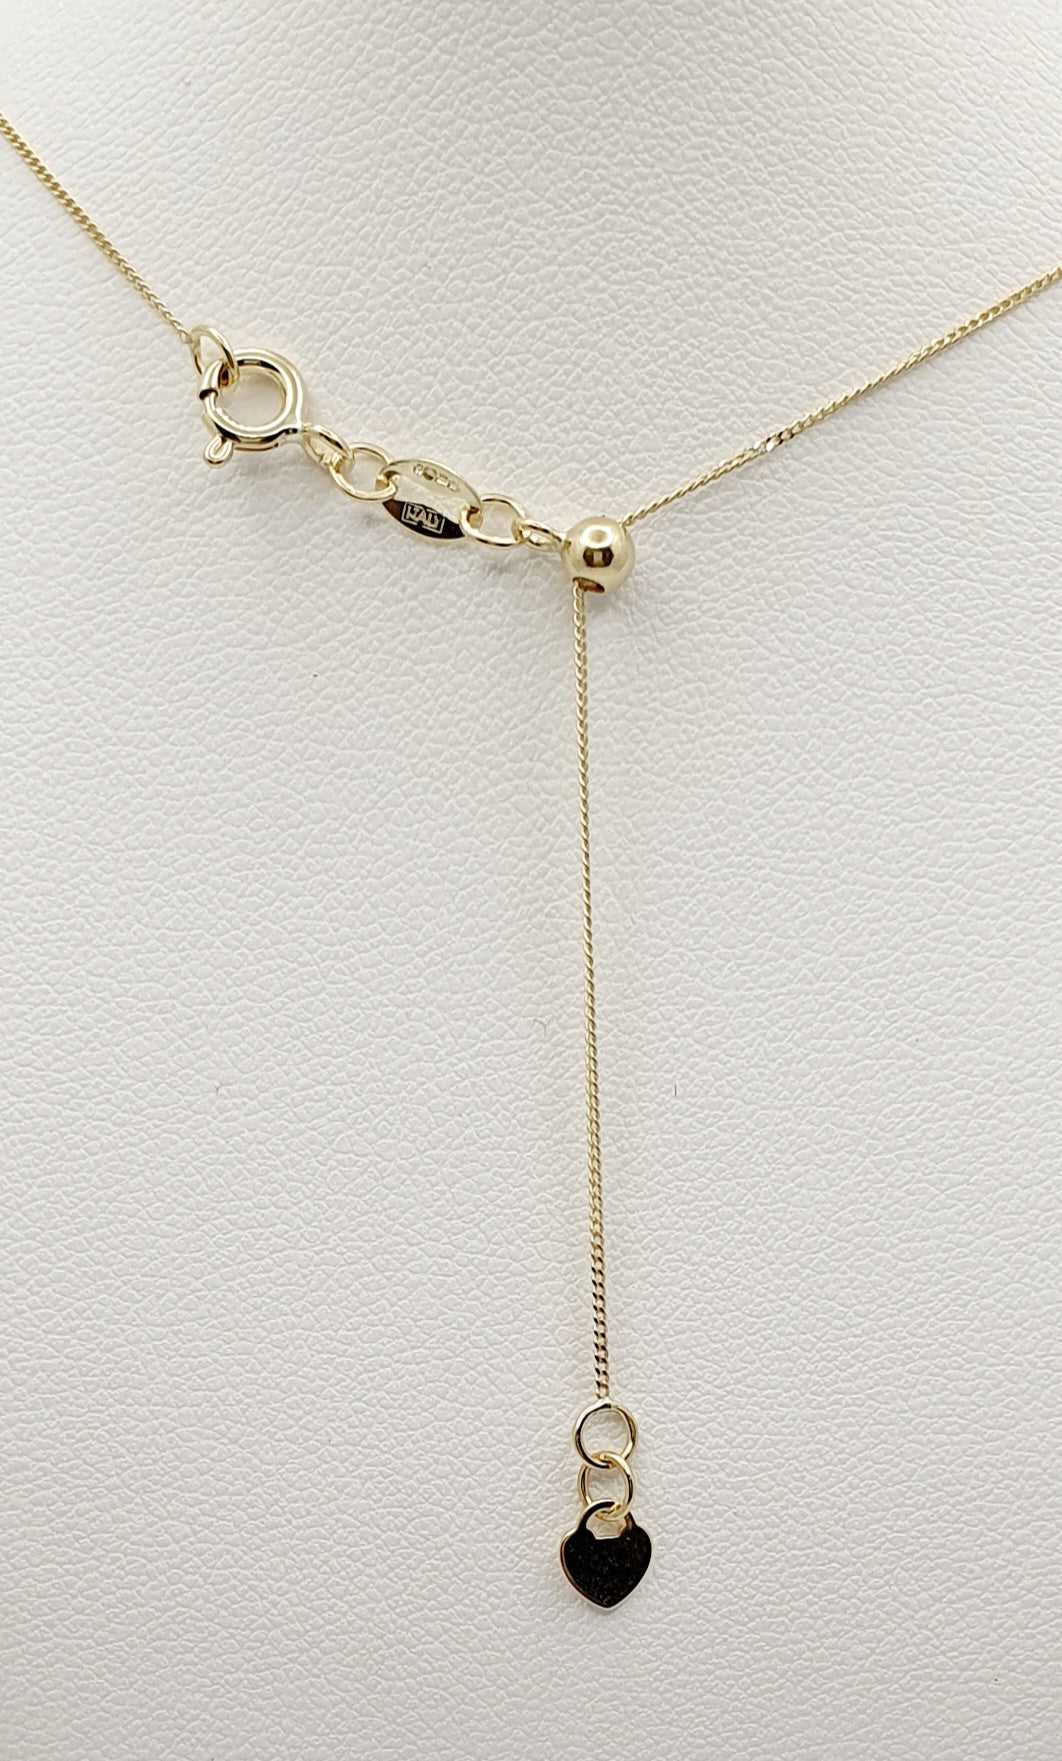 9ct Yellow Gold, Solid Curb Chain with Heart and Slide Adjustment 56cm